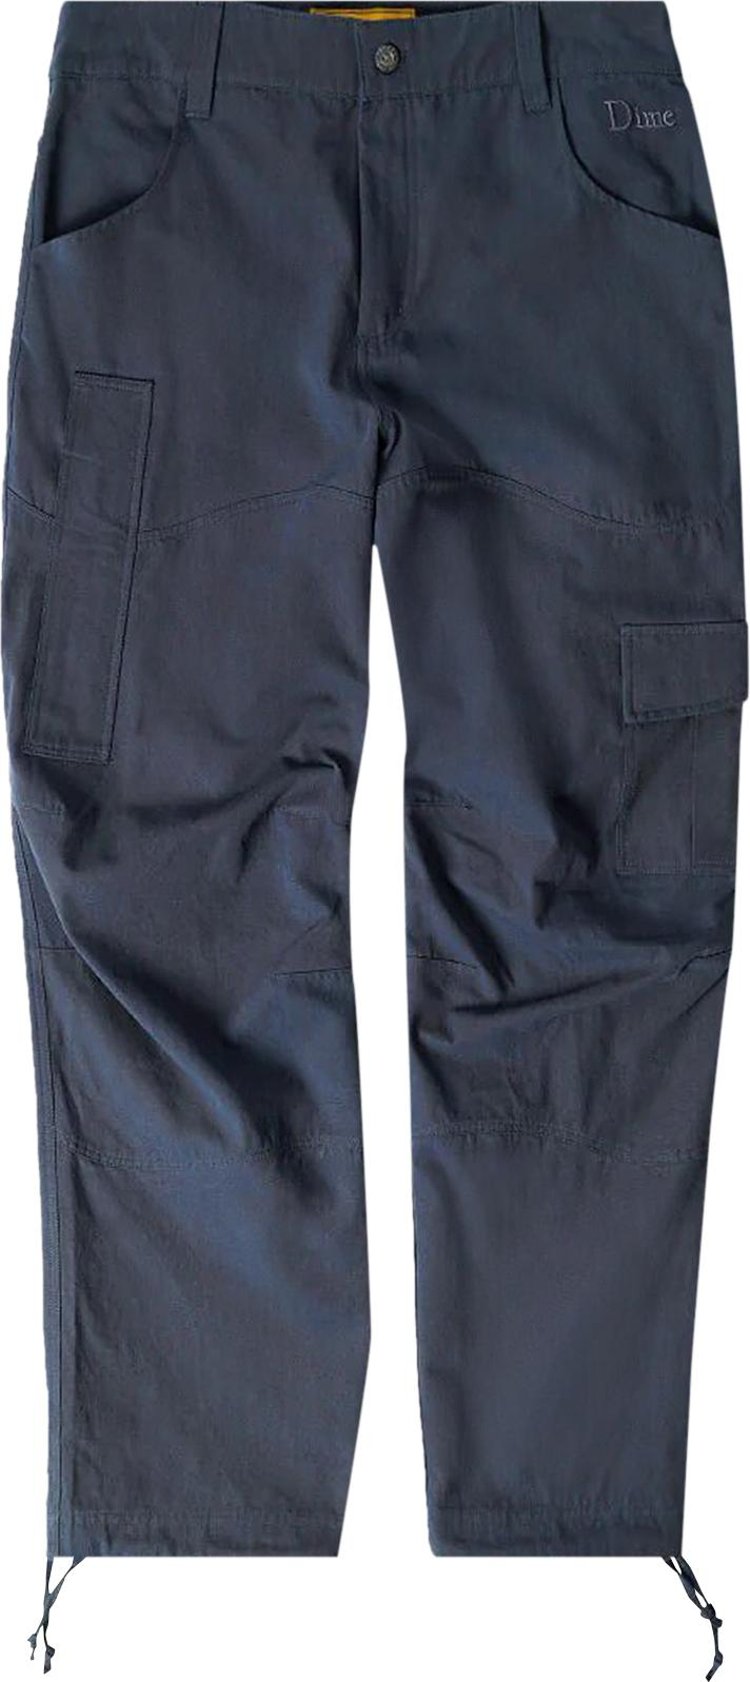 Dime Jurassic Cargo Pant 'Charcoal'